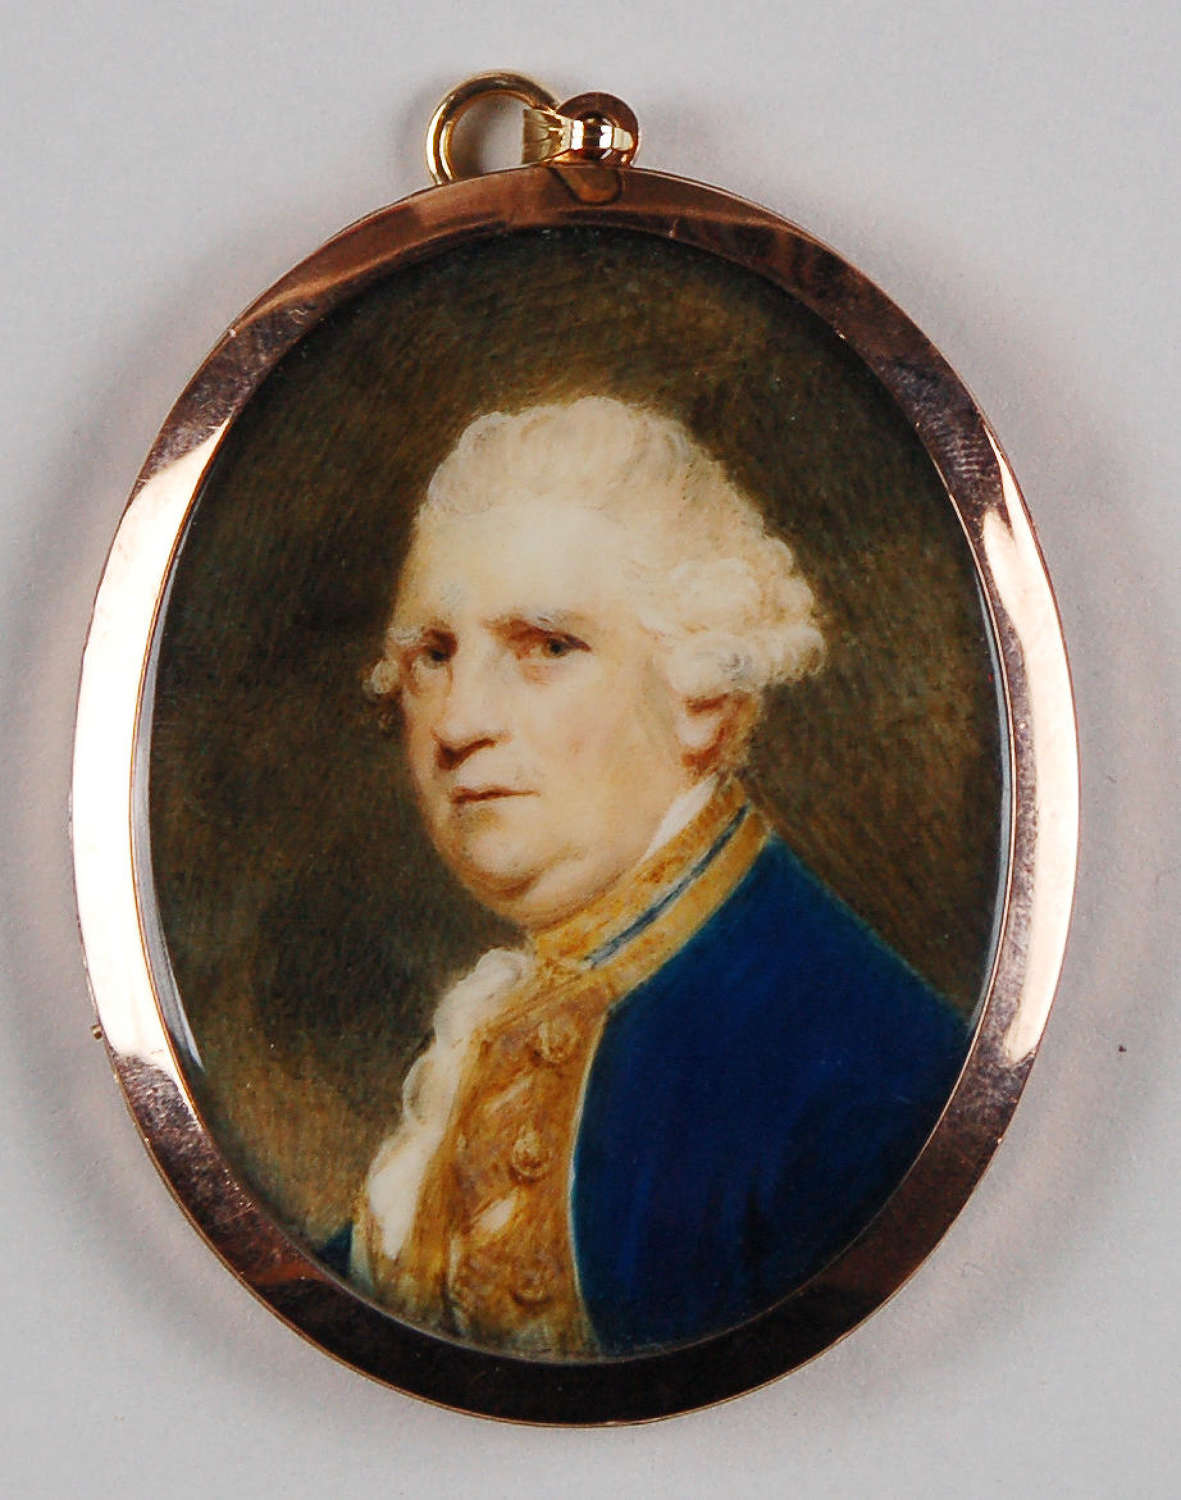 Miniature of Admiral Keppel by O Humphrey C1775